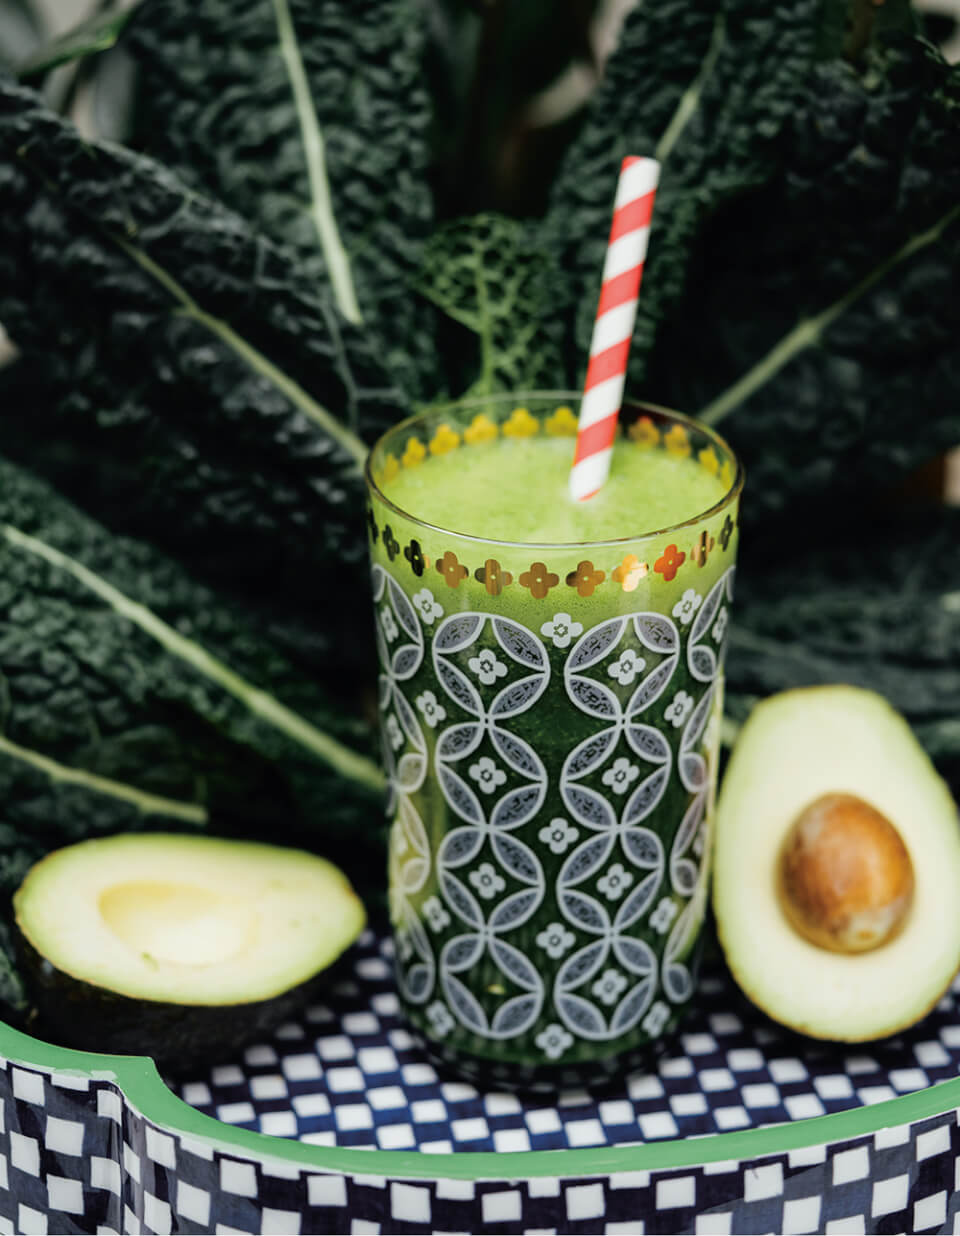 A green smoothie in a patterned glass with a sliced avocado next to it and green vegetable leaf behind